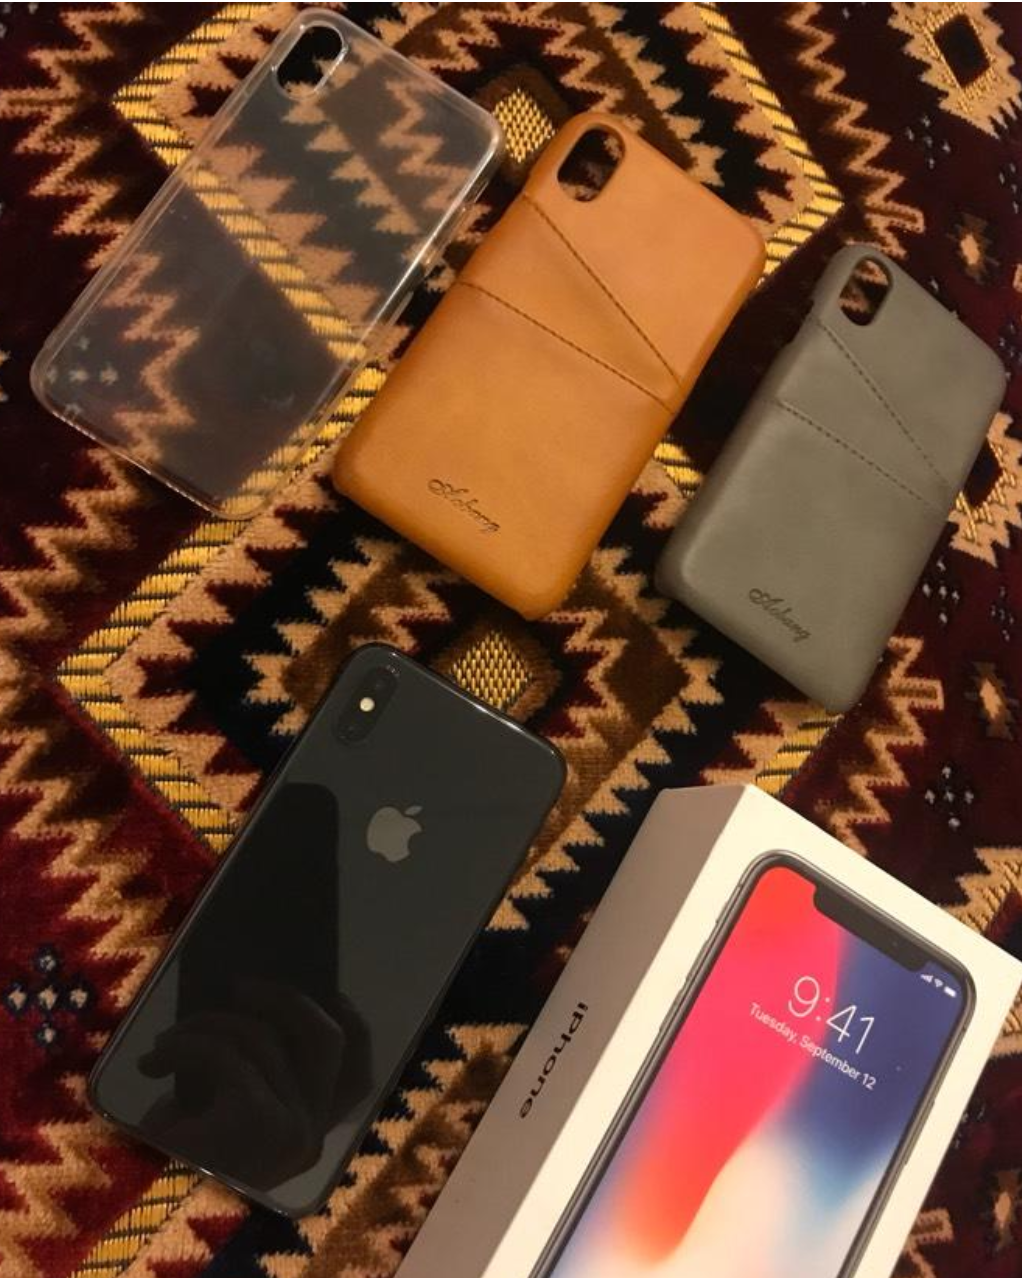 Apple iphone 11 pro iphone 11 pro maxApple iphone 11 pro - 550$Apple iphone 11 pro max - 599$Brand New original .Free shipping.+ Apple warranty support info: wh-  ايفون x فلكي لا تنسَ أنك...